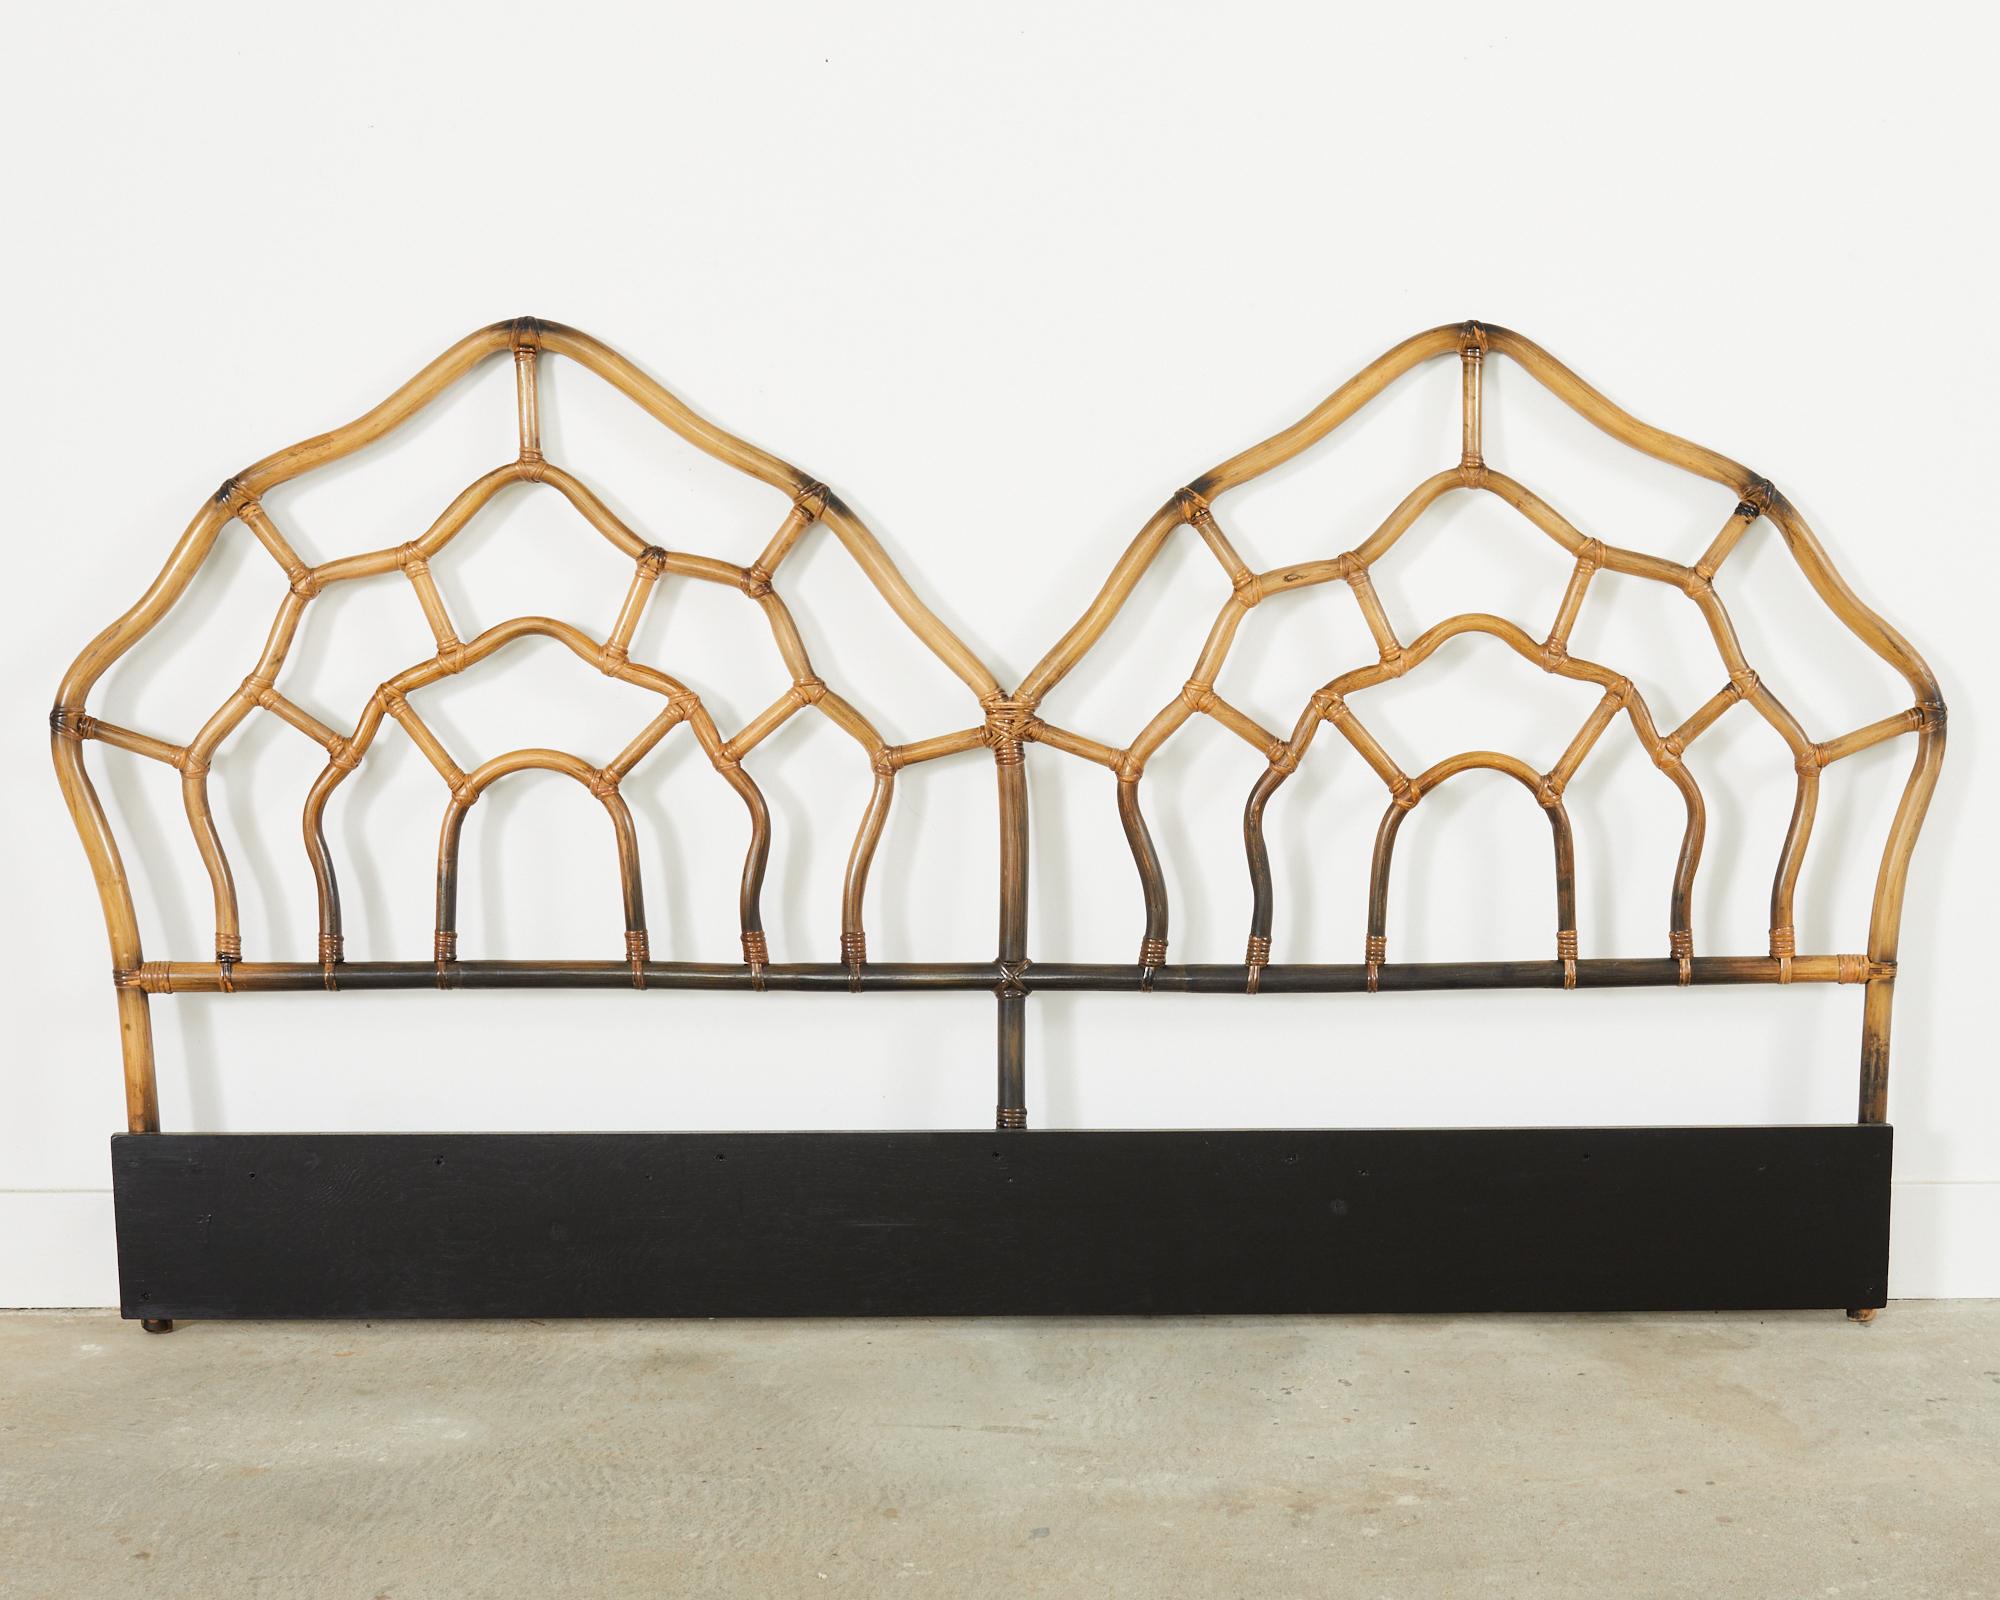 Monumental double headboard measuring 7 feet wide constructed from bent rattan featuring a faux-scorched bamboo style finish. Double humped crest with an open fretwork of conforming serpentine shapes. Made in the California coastal organic modern